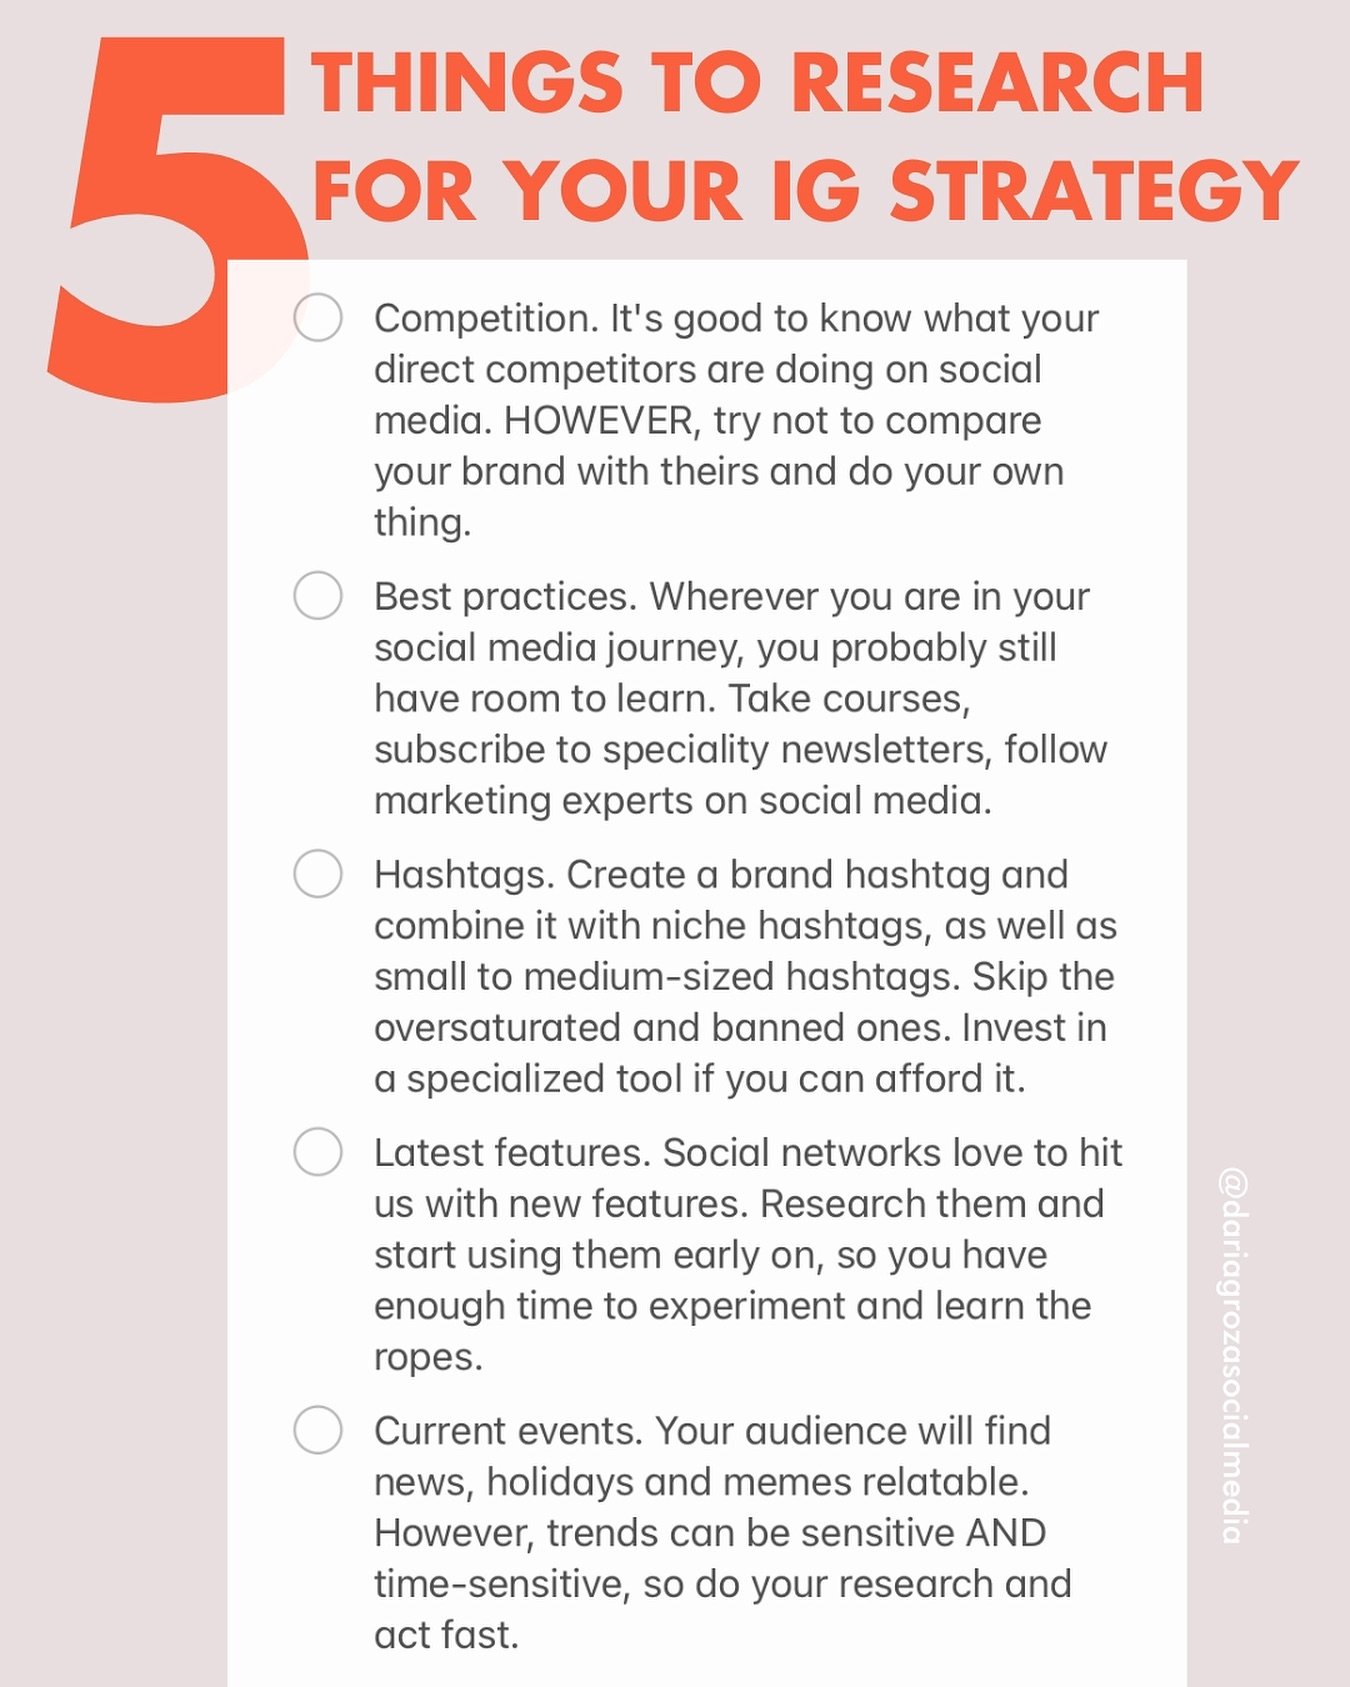 No one is too sweet for an Instagram strategy 😉

Add these 5 points to your research list and let me know where you&rsquo;ll get started! 👇 I&rsquo;ve been loving the courses and resources from @hubspot lately, so that&rsquo;s where I am right now.